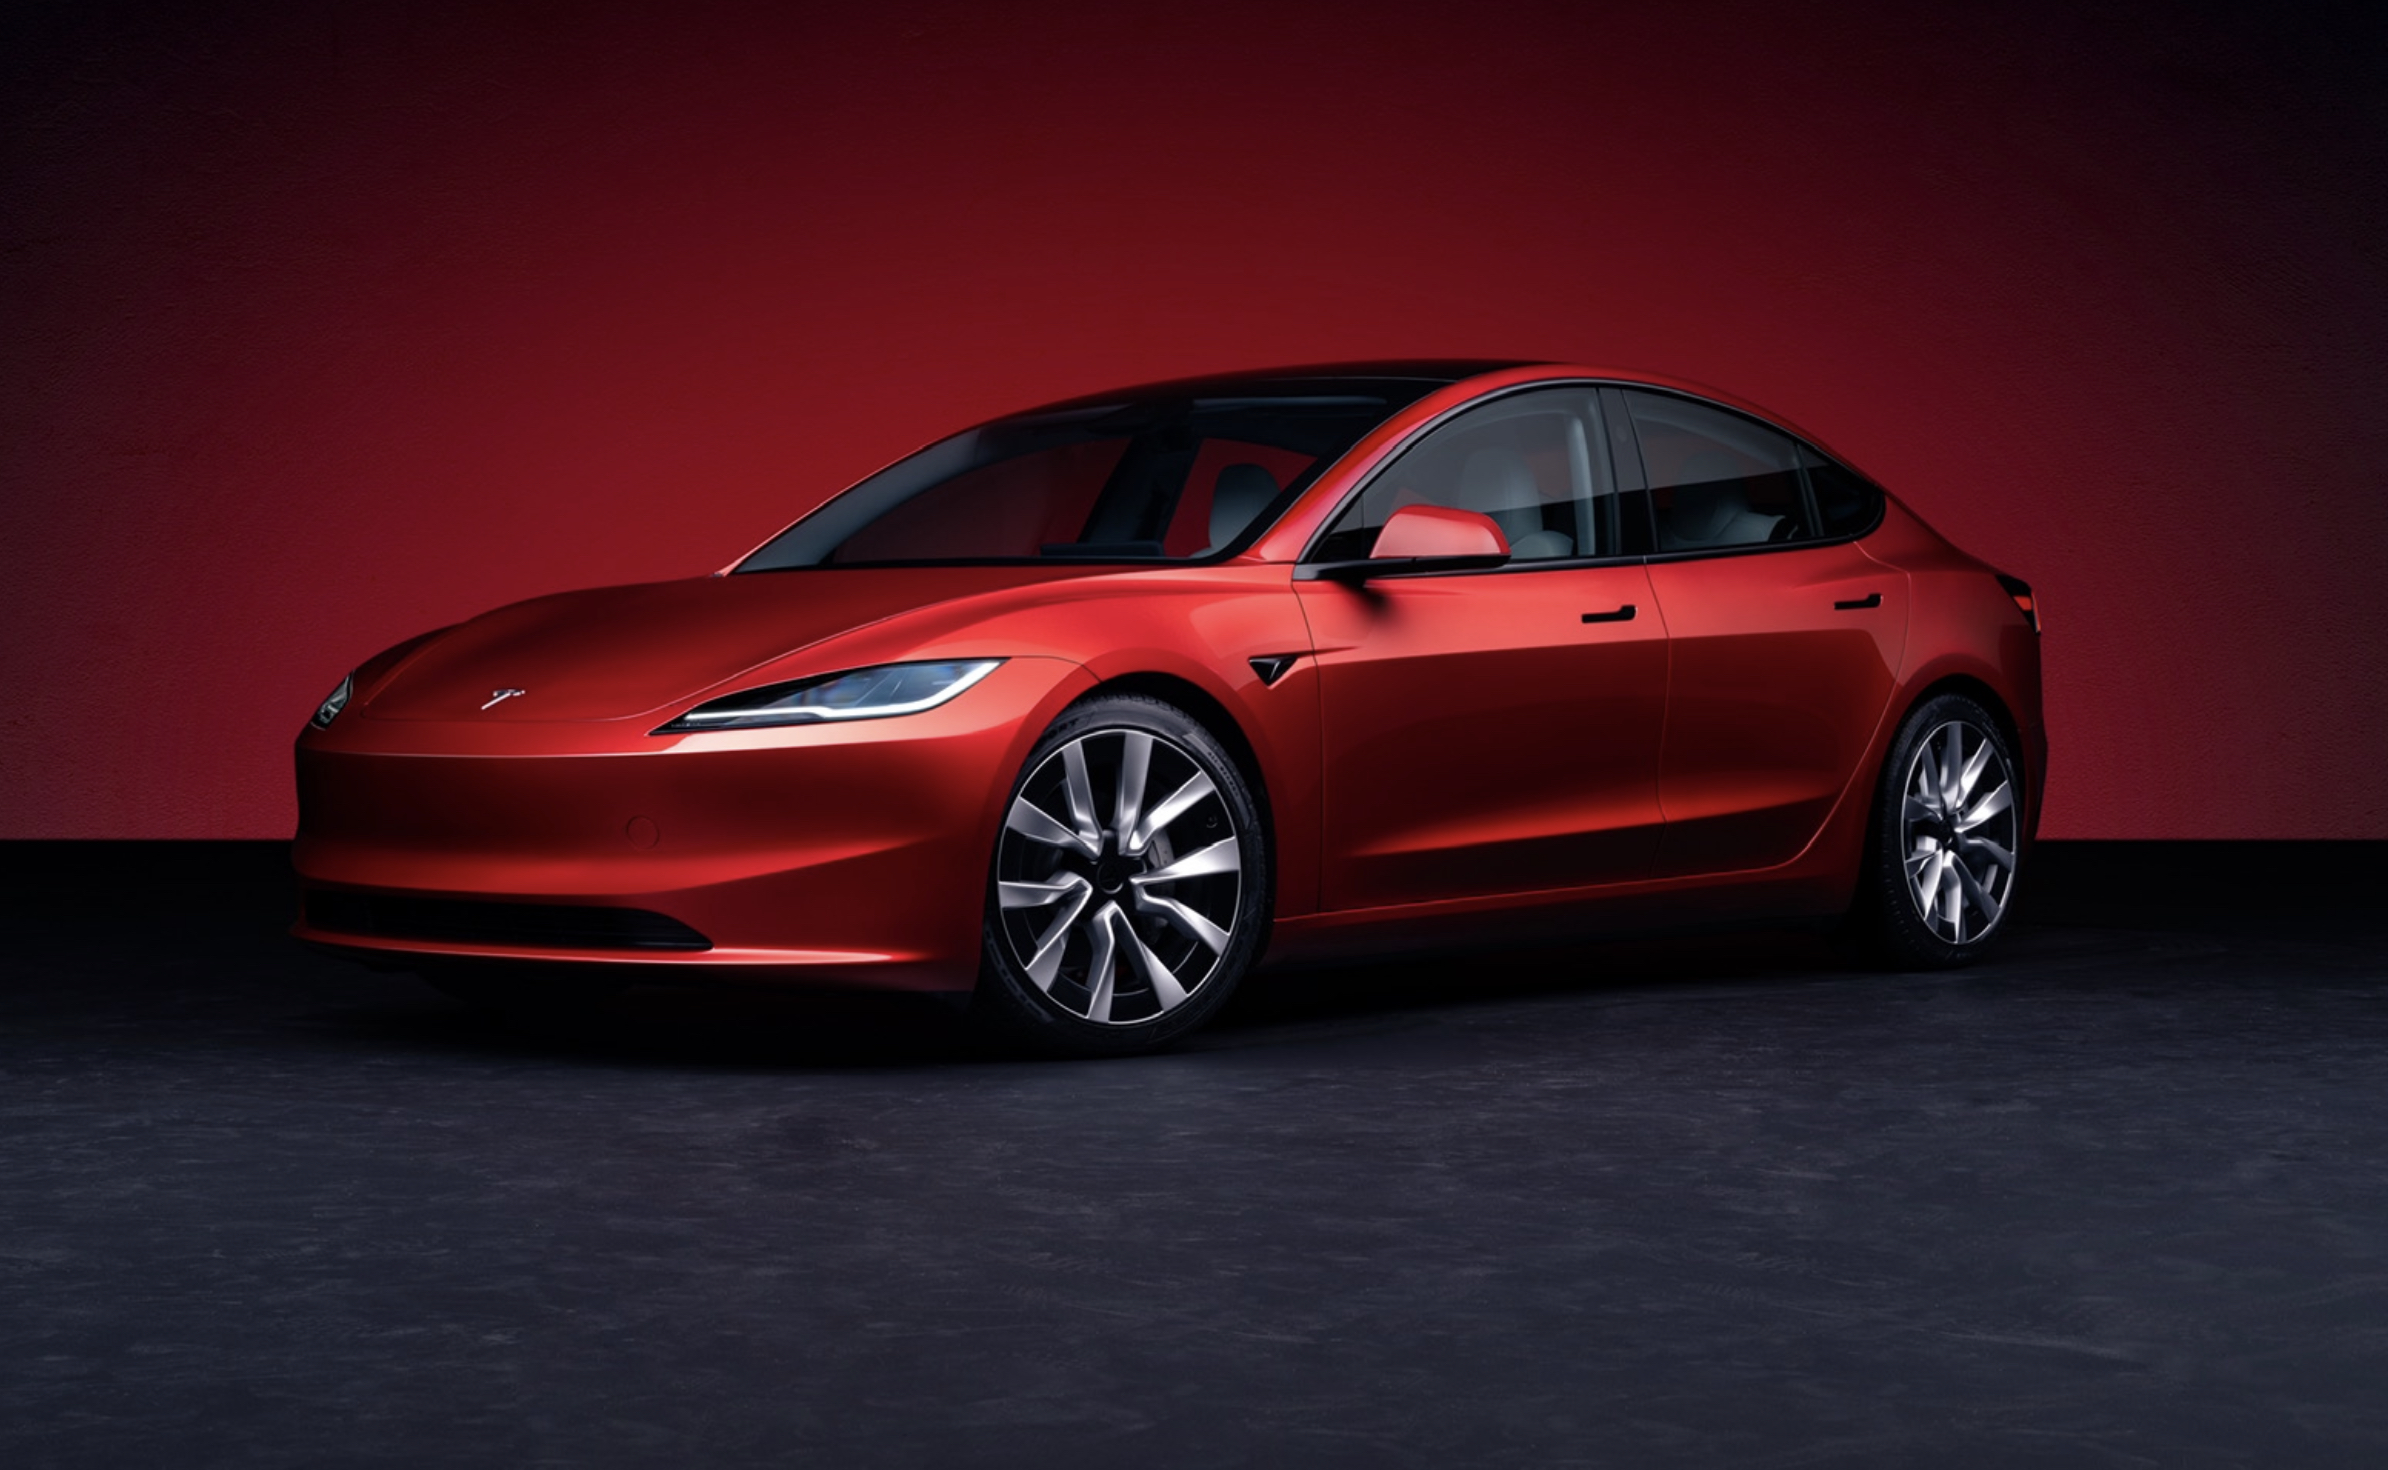 BYD Seal hunter: Here’s what we’ve learnt about the new ‘Project Highland’ Tesla Model 3 ahead of its Australian arrival